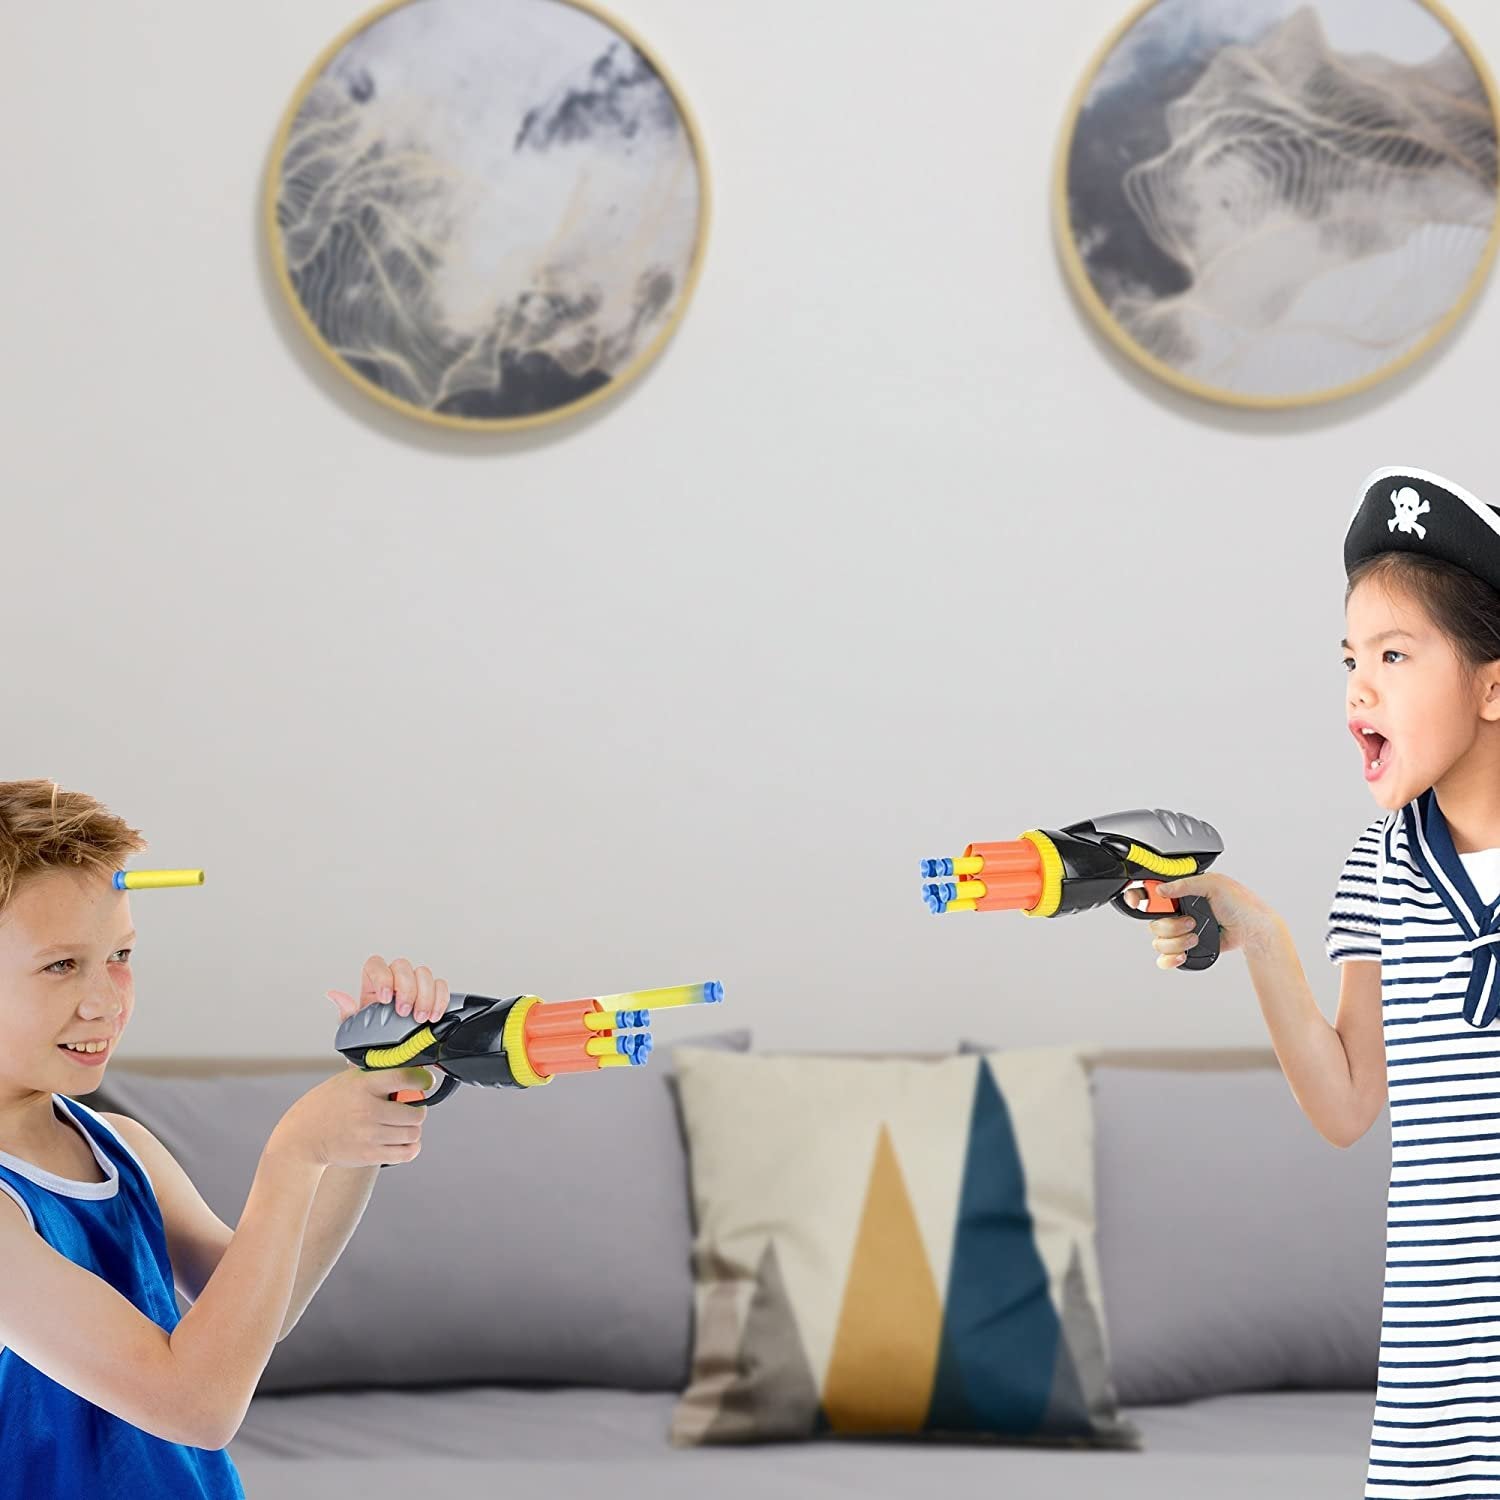 ArtCreativity 10 Inch Missile Launcher Toy Gun for Kids with 6 Suction Cup Darts, Futuristic Space Blaster Air Dart Pistol, Sturdy Plastic Design - Great Gift Idea for Boys and Girls